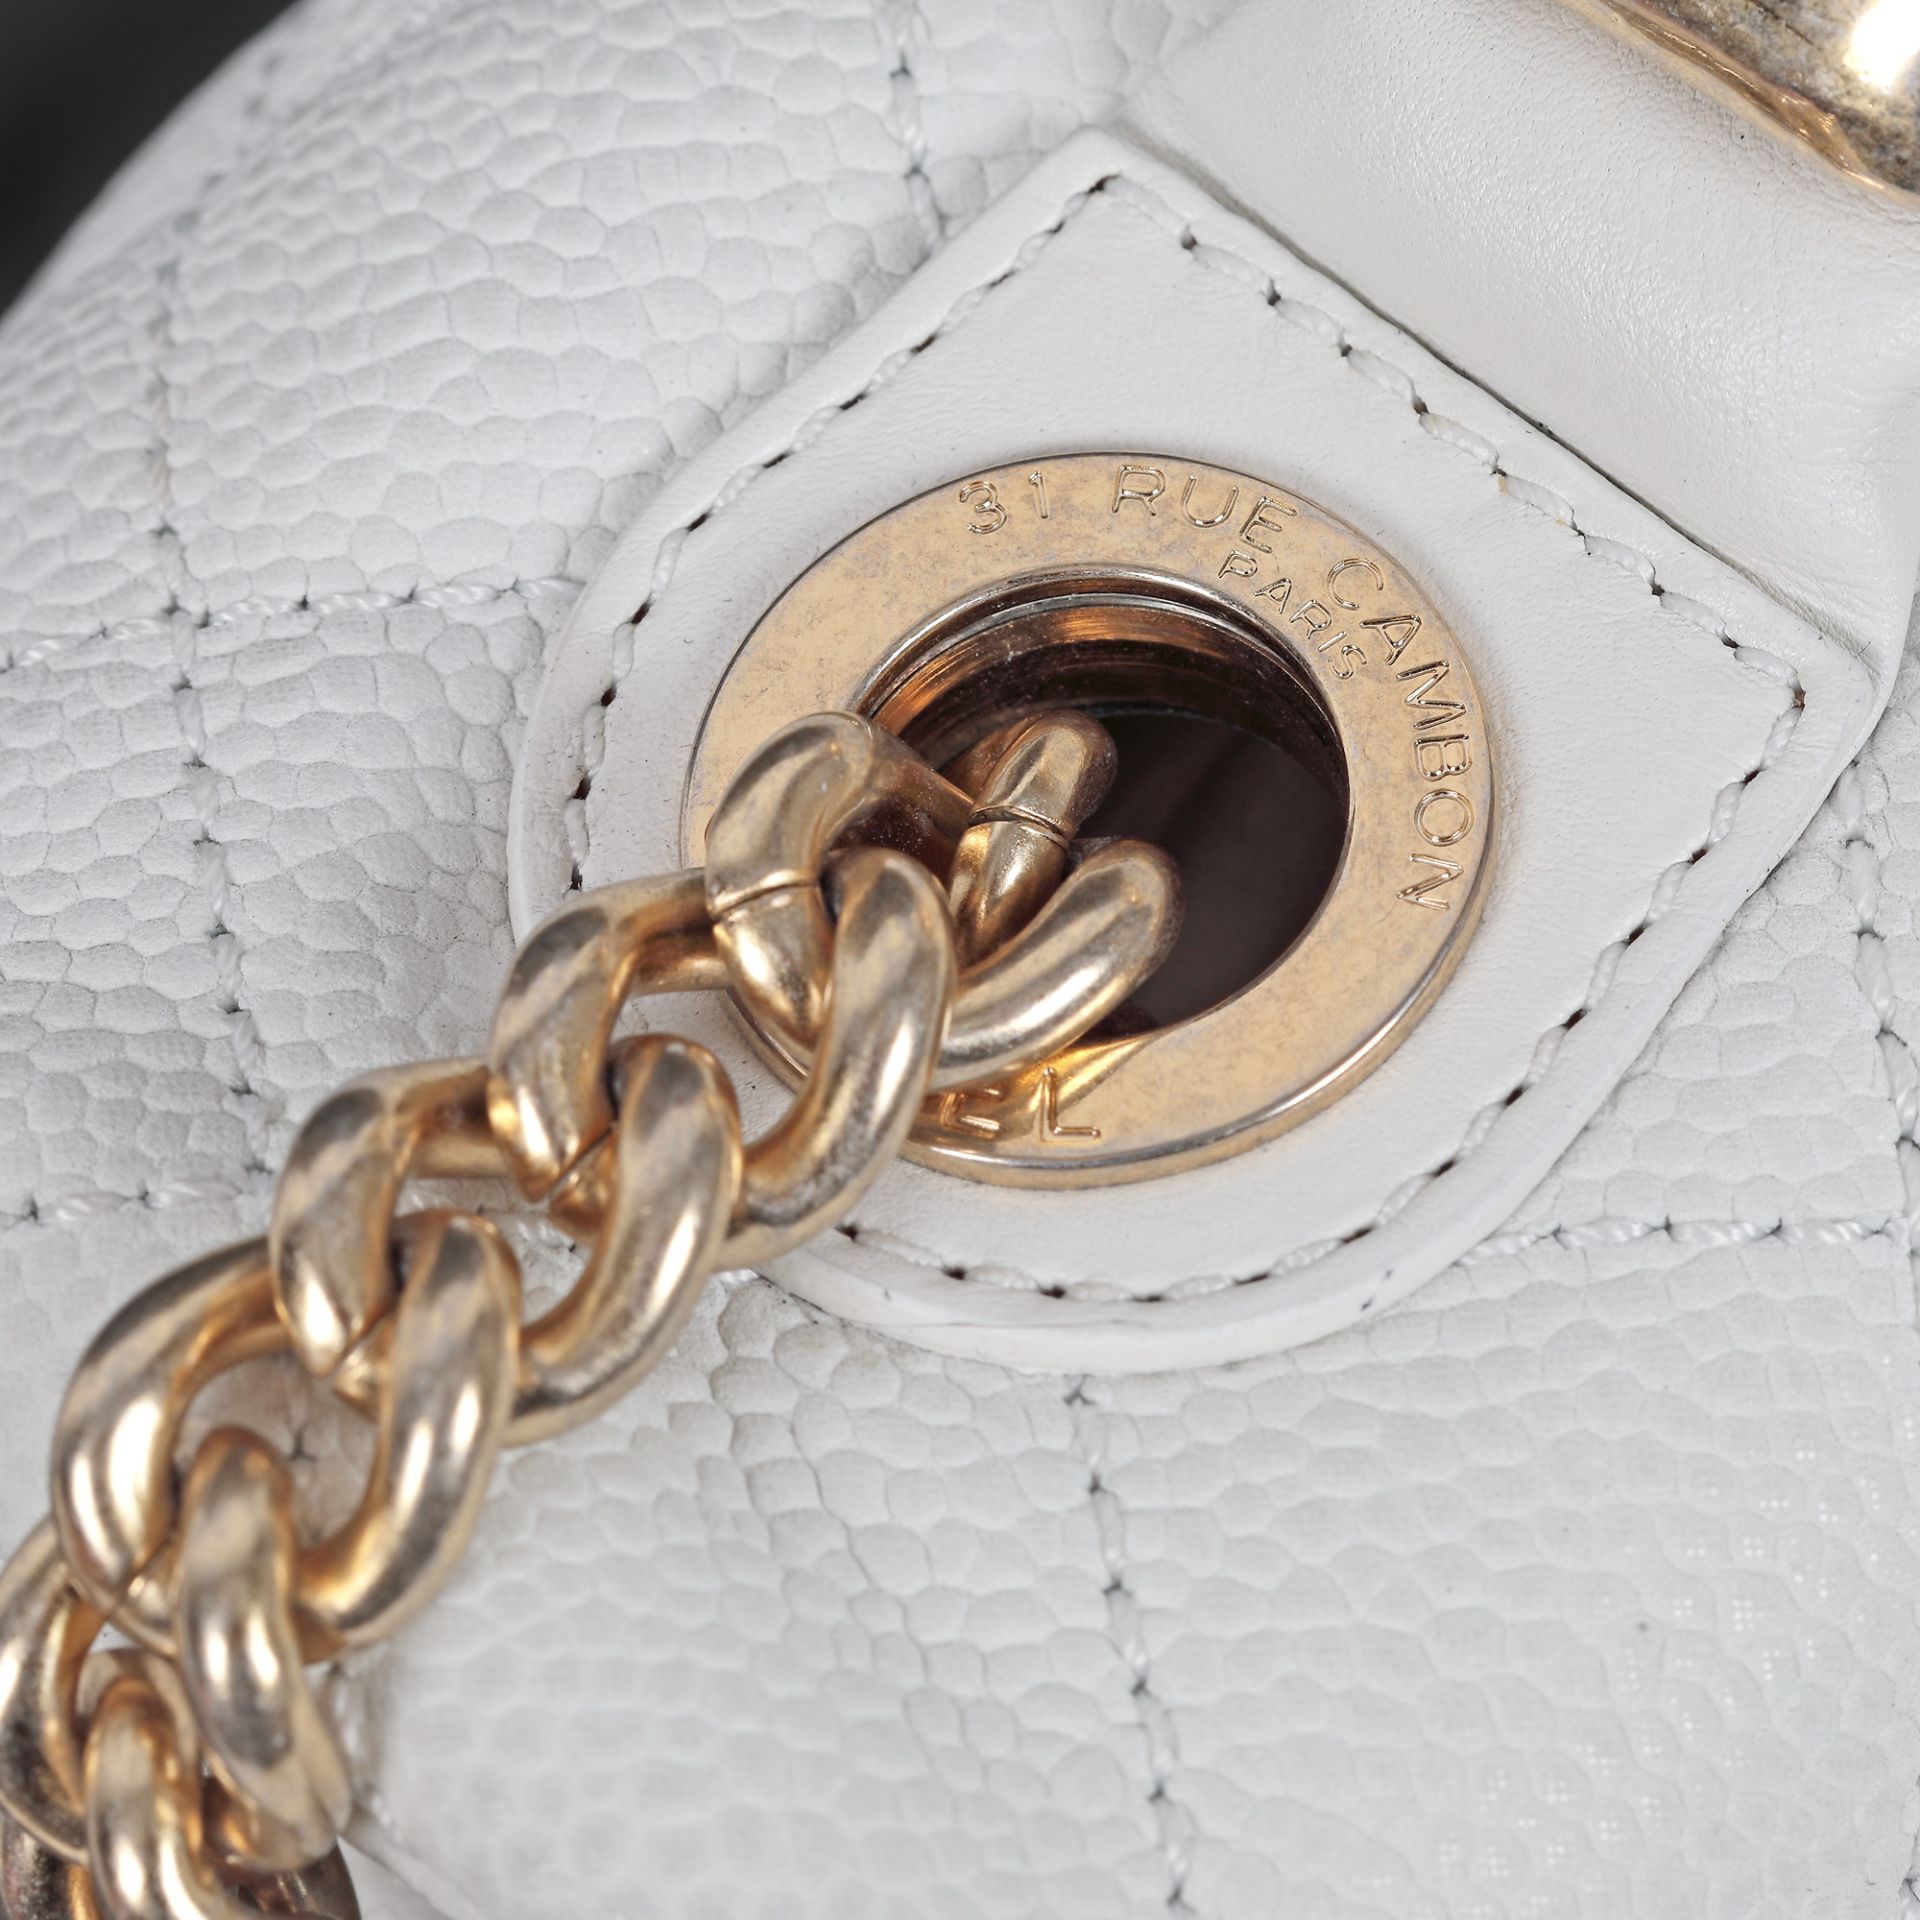 "Globe Trotter Flap" - Chanel bag, quilted leather, white - Image 4 of 6